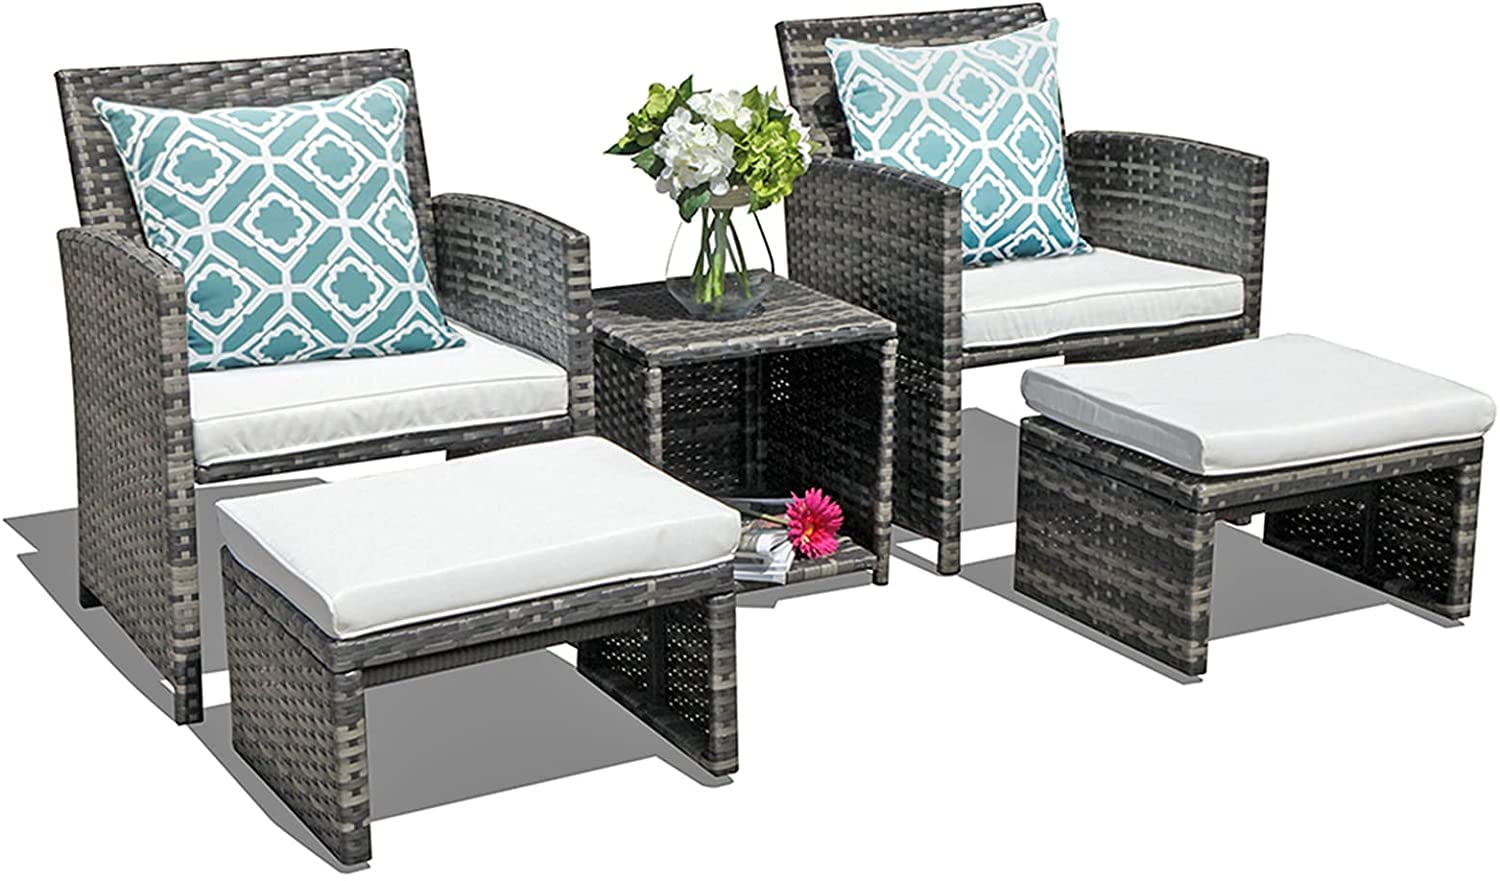 Wicker Patio Furniture Set Rattan Patio Chair Set with Ottoman, Pillows  Included, Perfect for Balcony, Small Space, Porch, 5 Pieces - Walmart.com